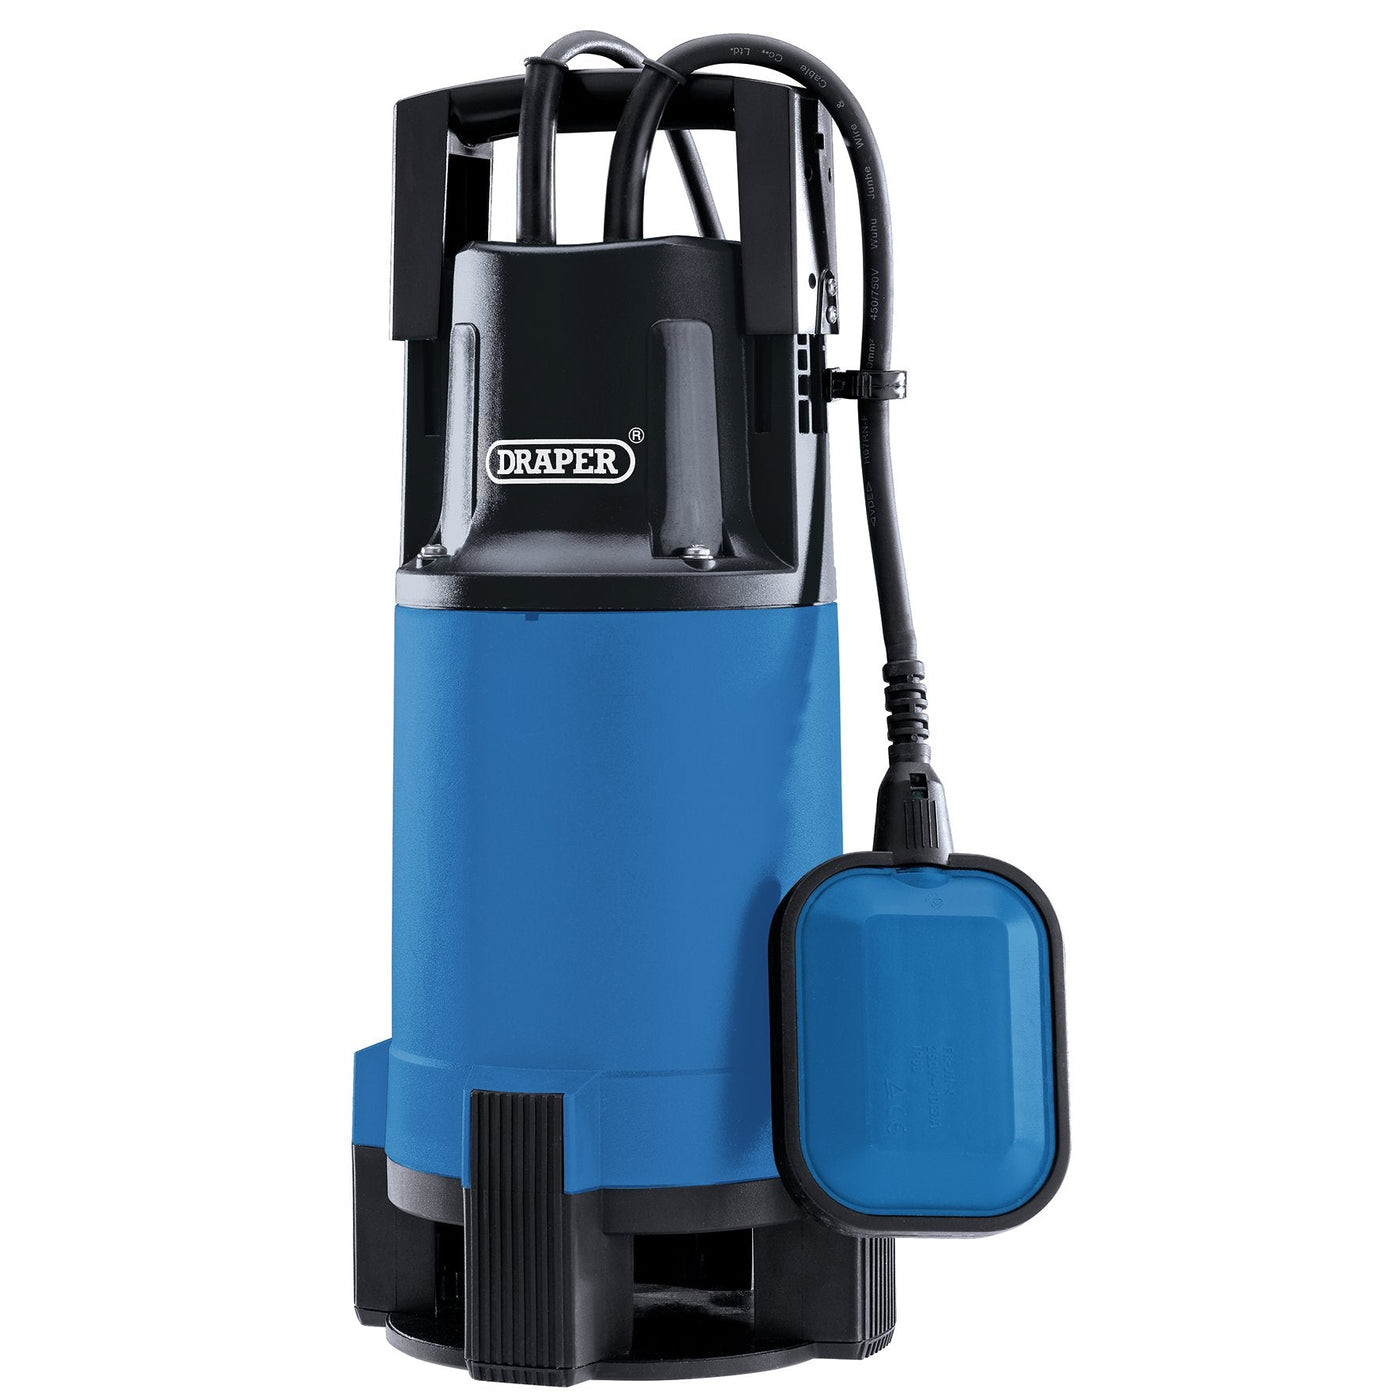 Draper 98920 110V Submersible Dirty Water Pump with Float Switch (750W)